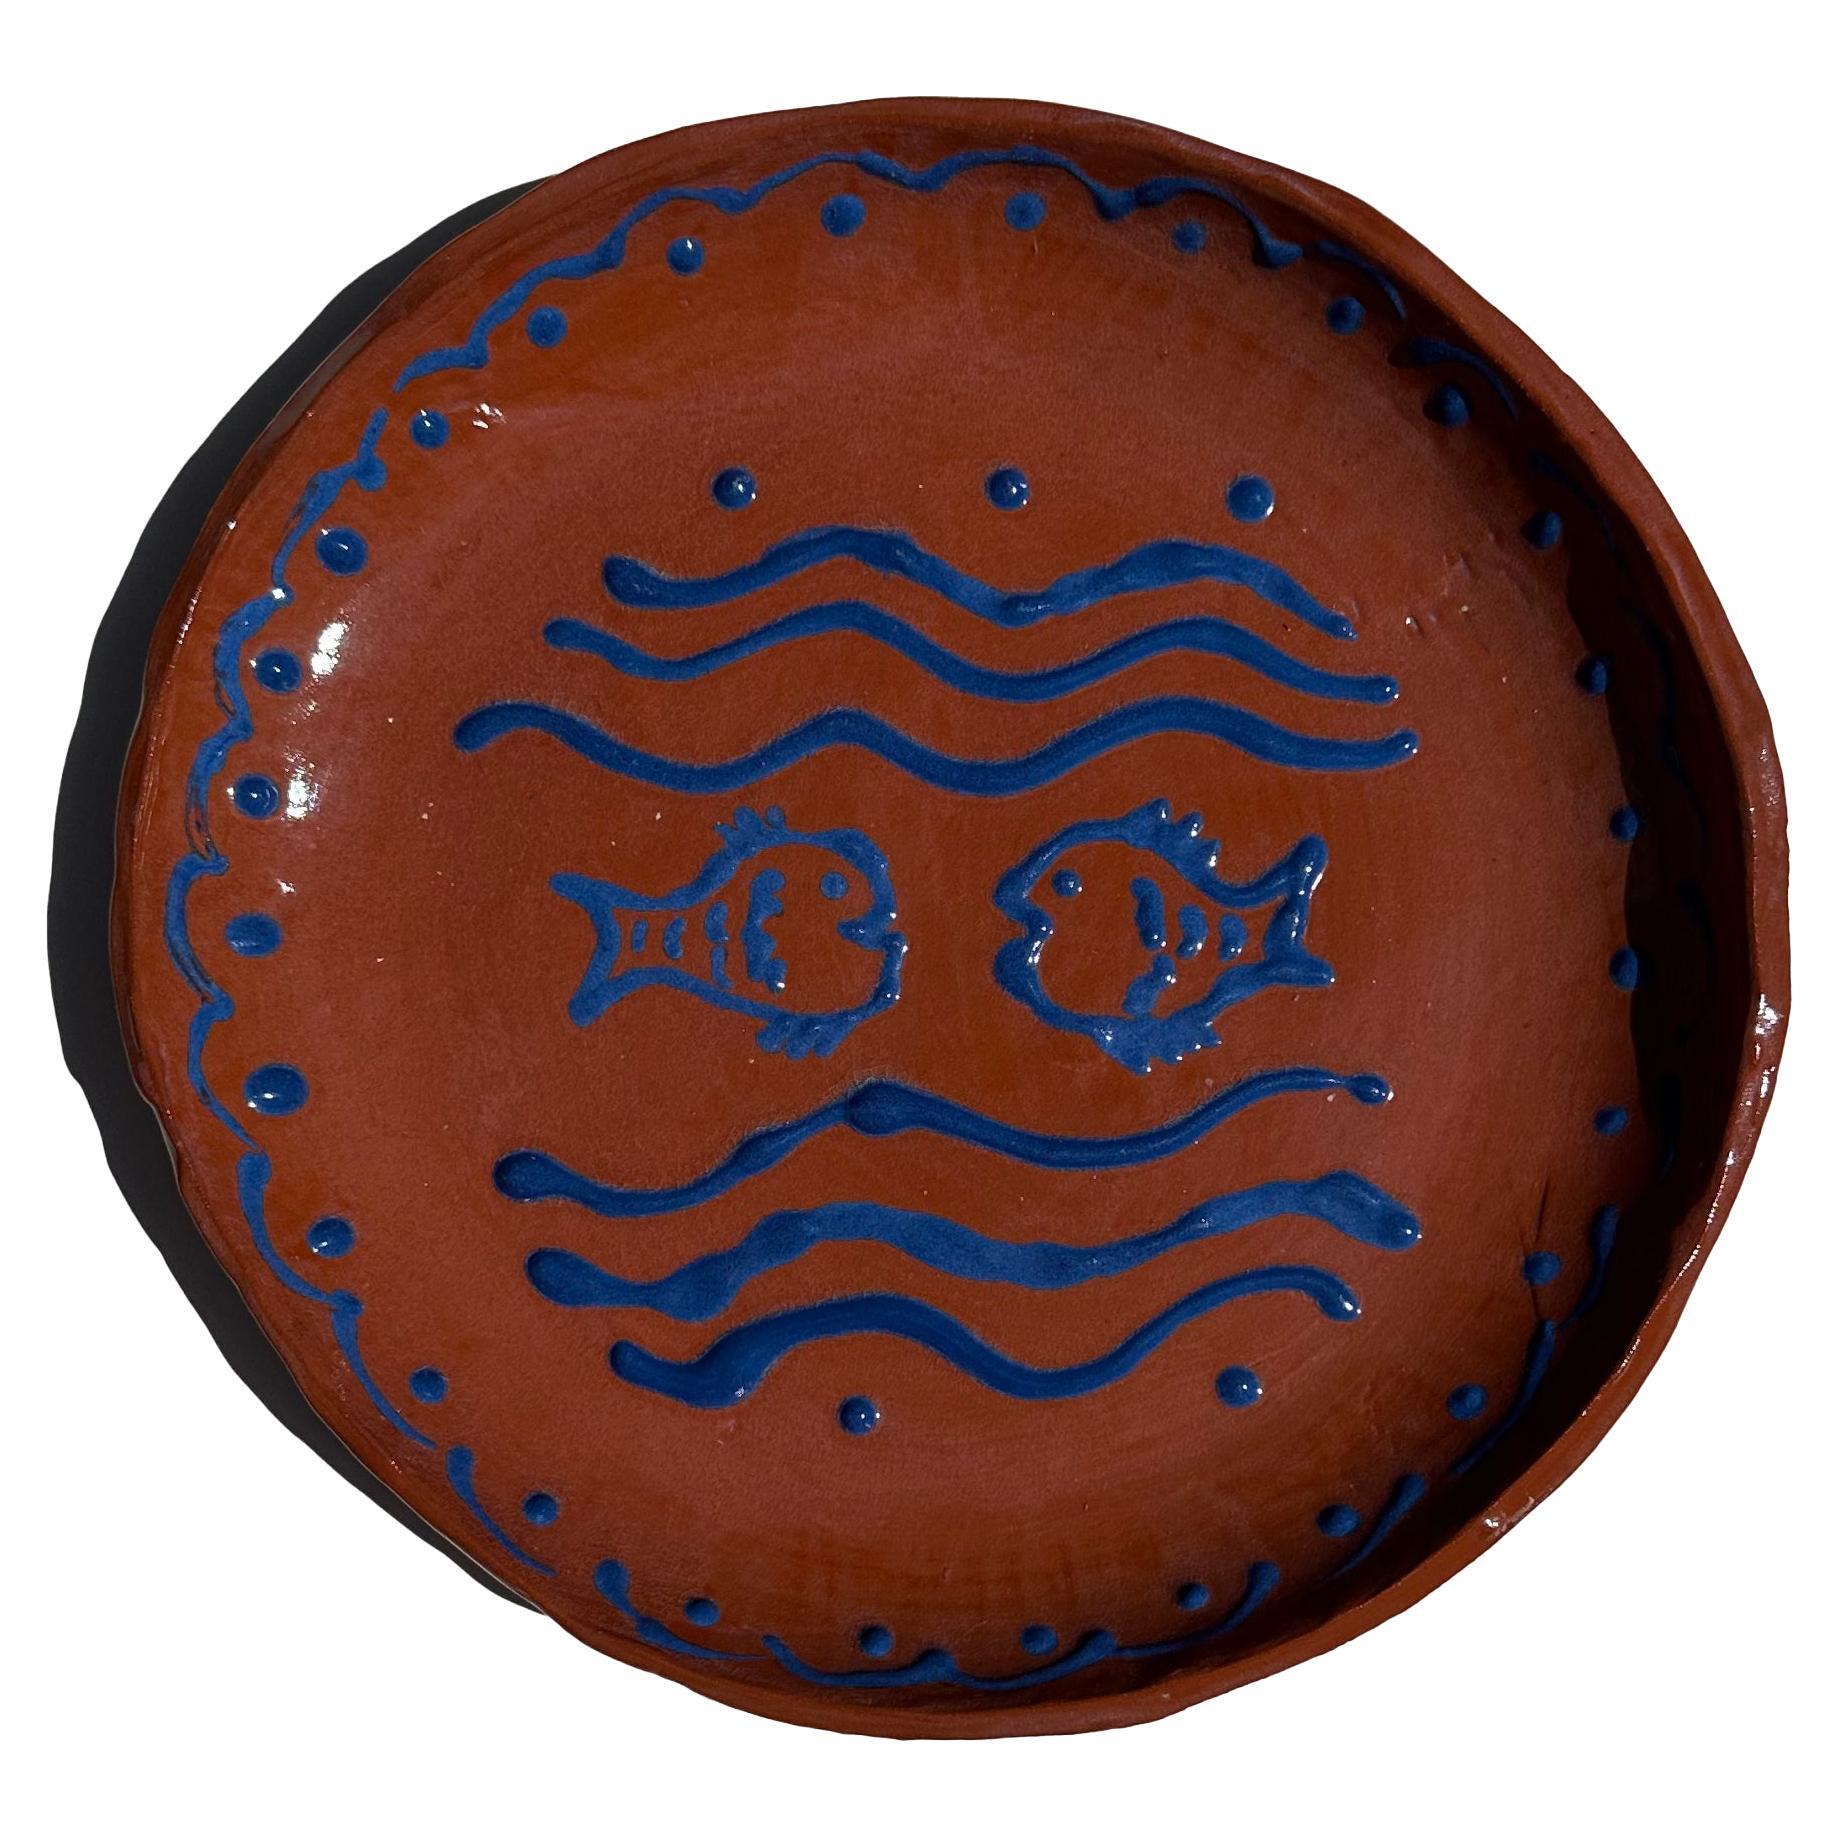 Hand-Painted Ceramic Serving Plate with Blue Aquatic Scalloped Details